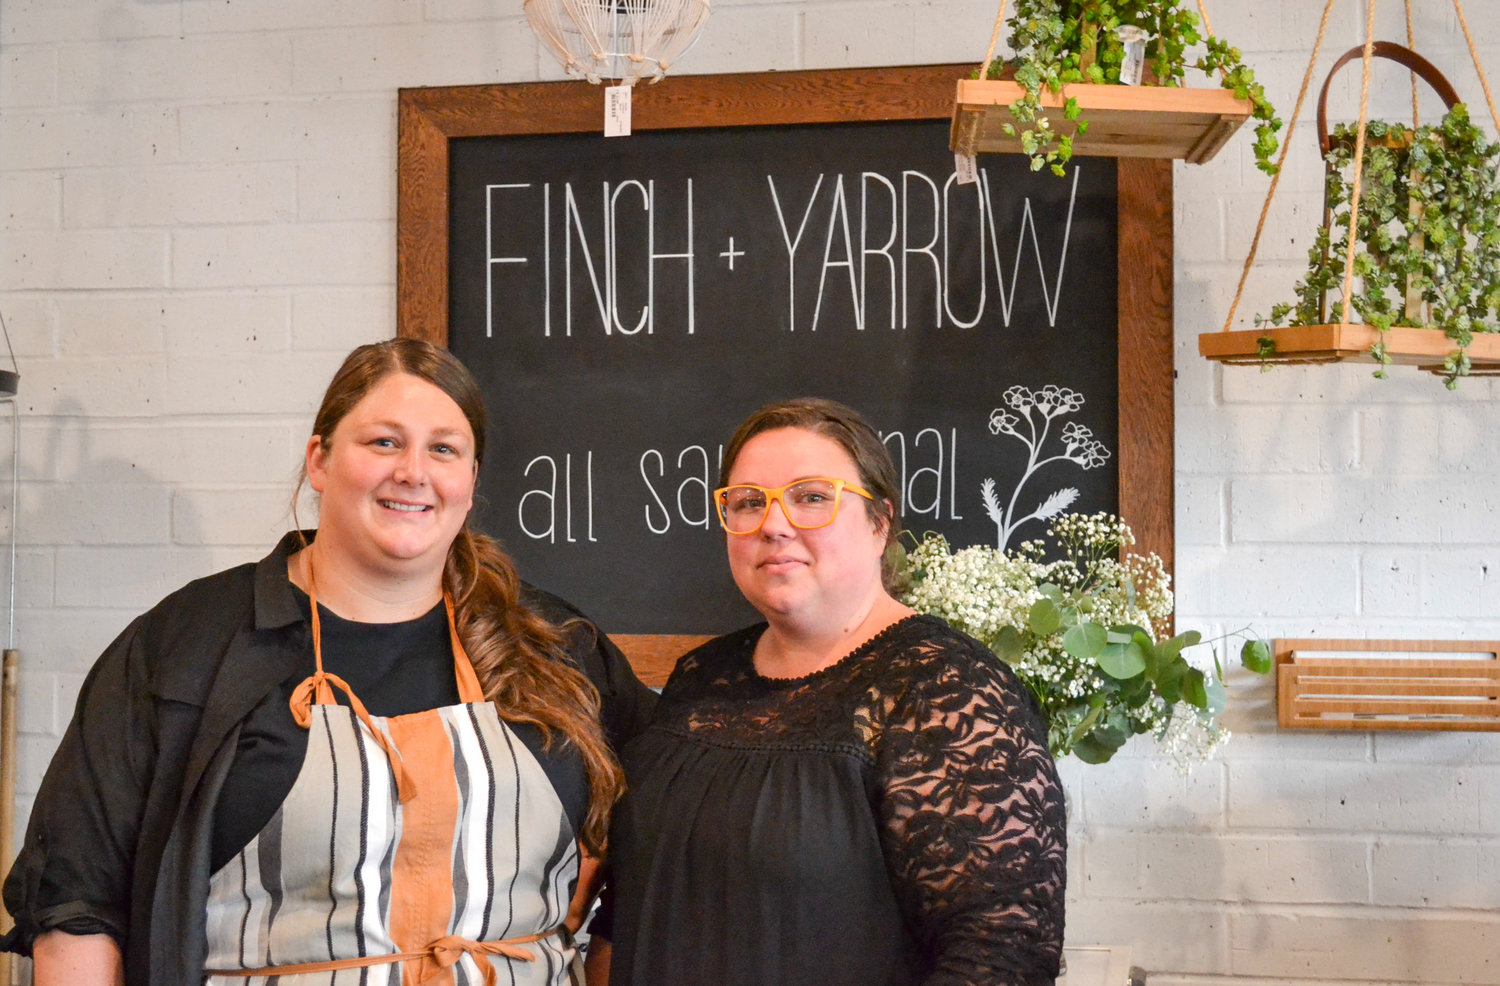 Amboy residents Megan Helmers, left, and Maggie Bellikka opened Finch + Yarrow to provide their local area more options for shopping.